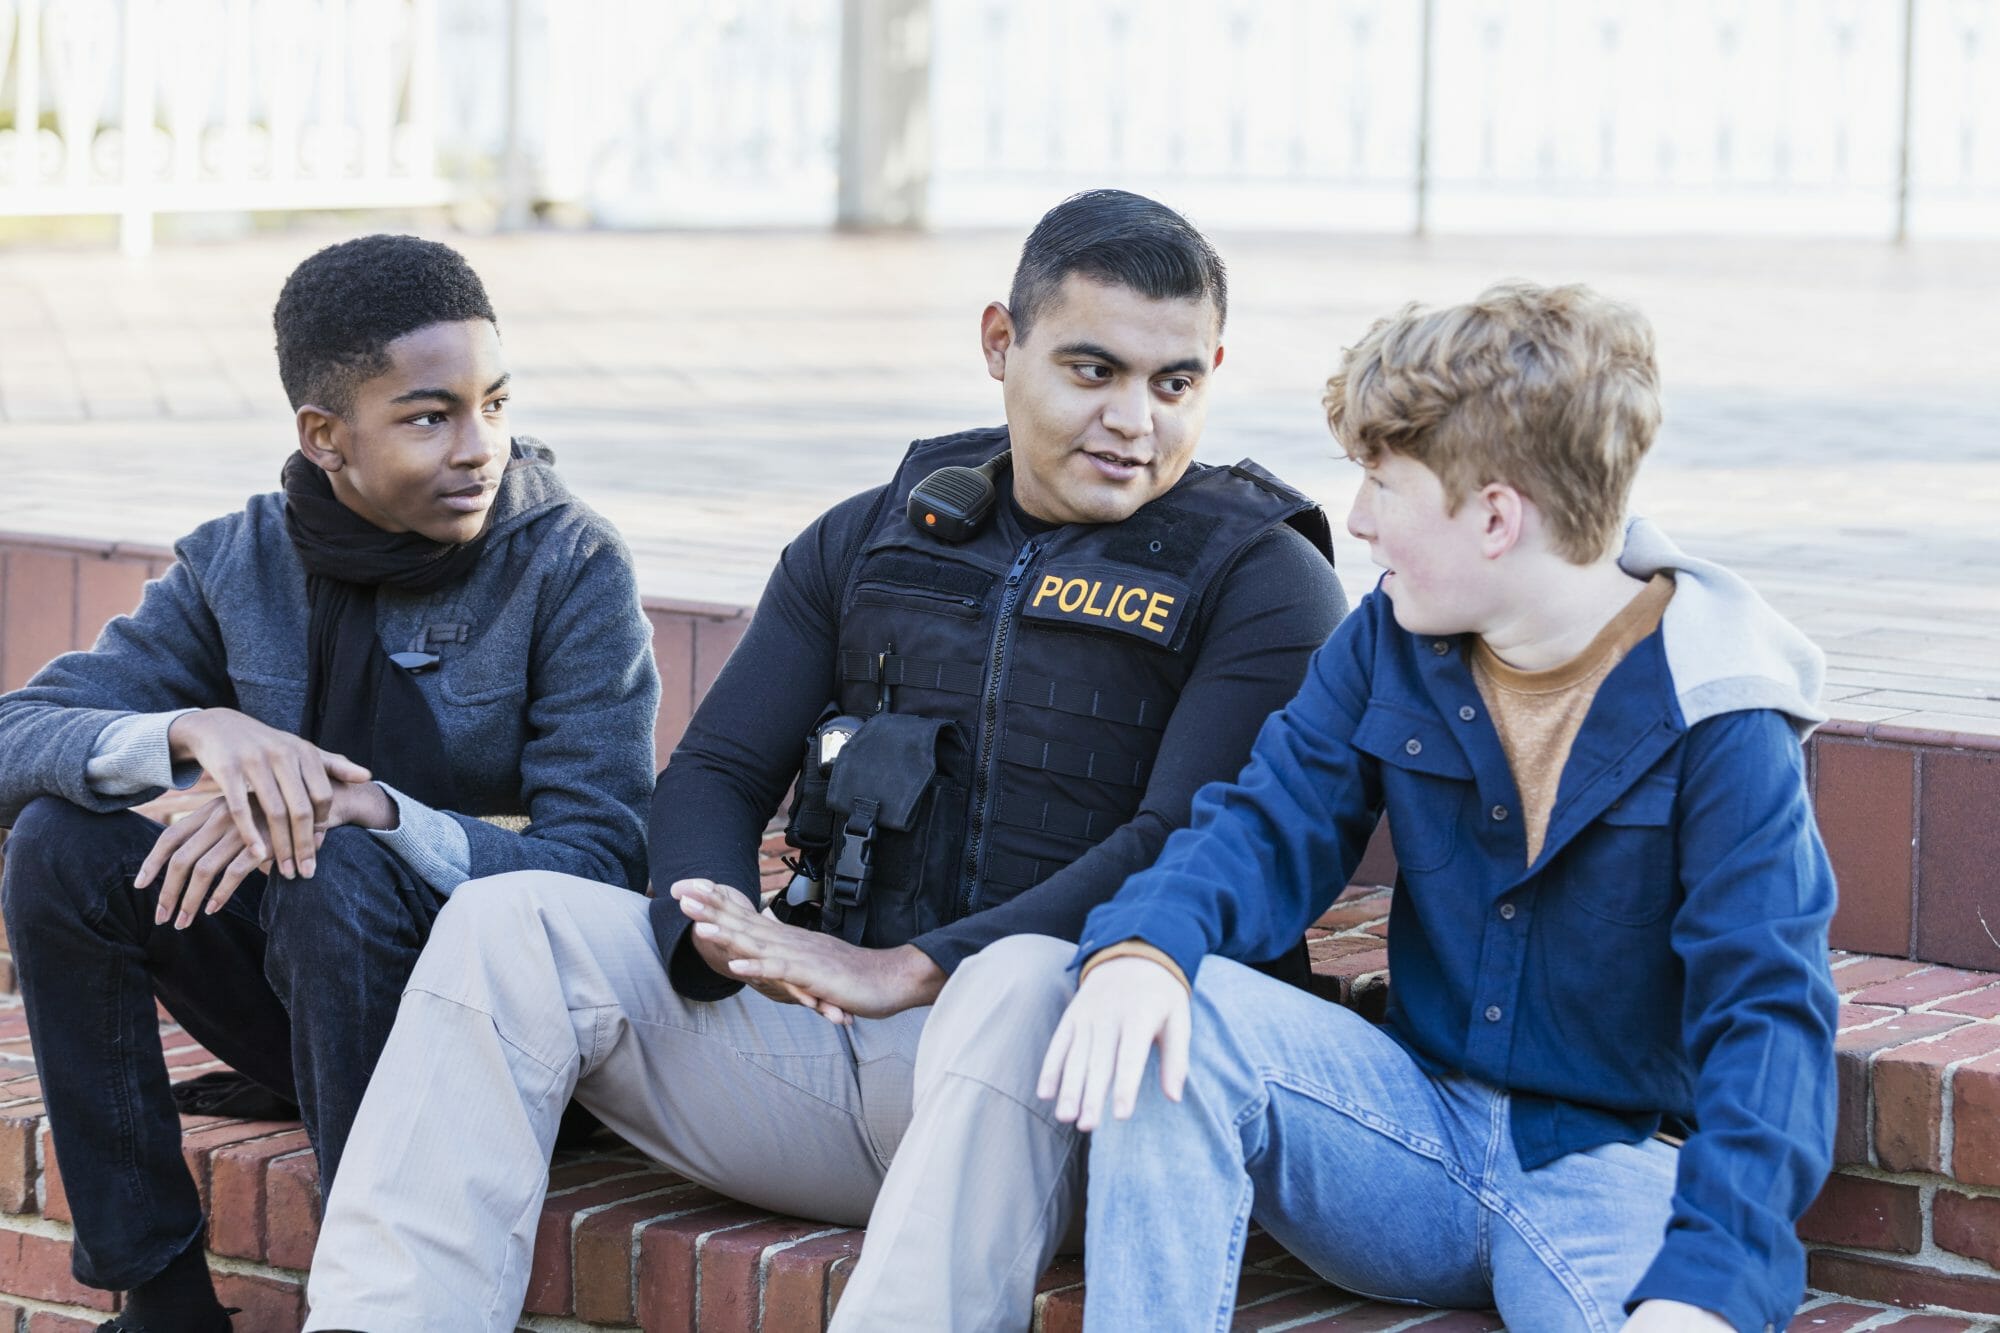 police officer and two young teens sitting together and talking